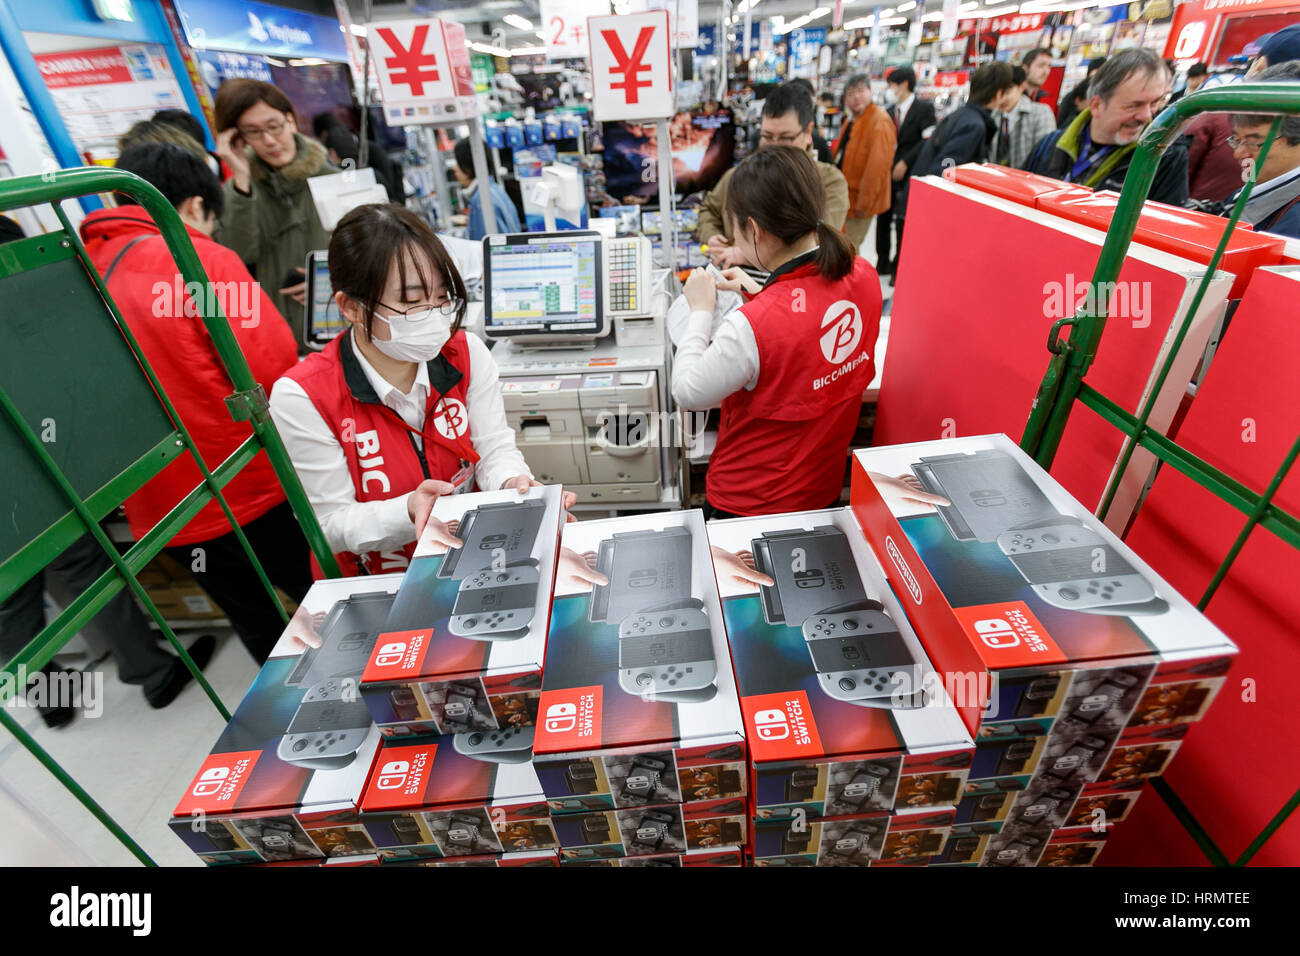 Tokyo Japan 3rd March 17 Employees Of Bic Camera Sale The New Nintendo Switch Console To Customers At Ikebukuro Branch On March 3 17 Tokyo Japan Over 100 Nintendo Fans Lined Up